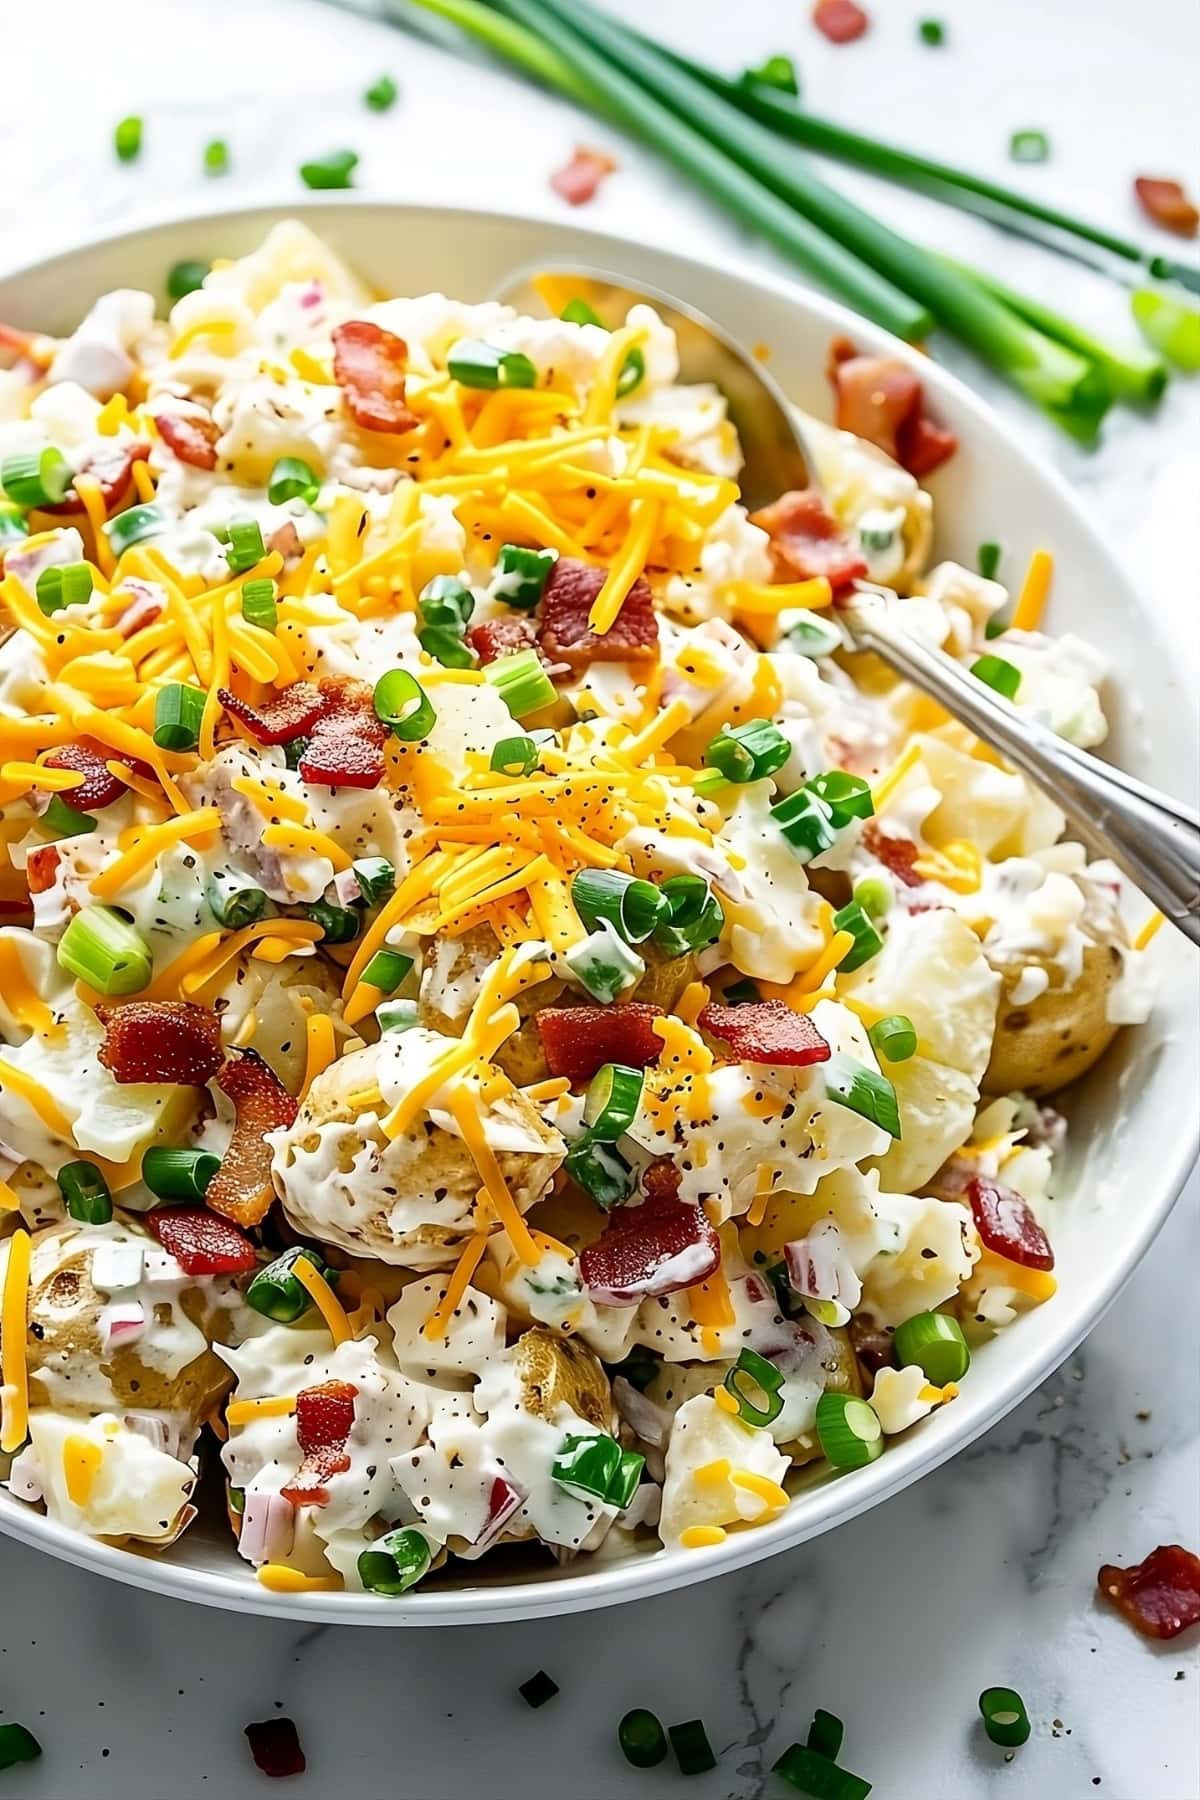 Loaded baked potato salad topped with lots of shredded cheese, bacon and green onions in a white bowl with spoon.